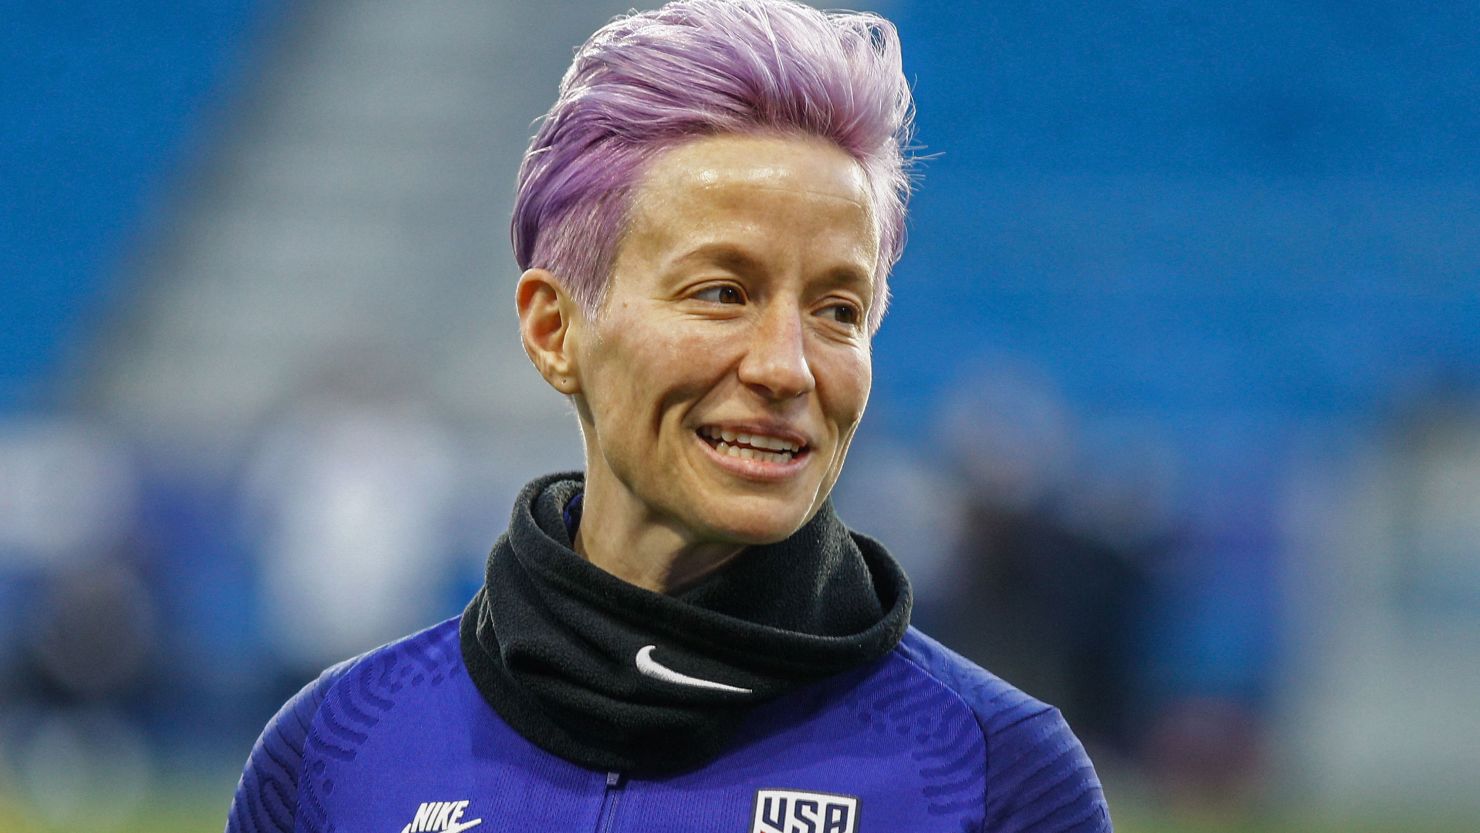 Megan Rapinoe is among a group of women athletes to back abortion rights at US Supreme Court.